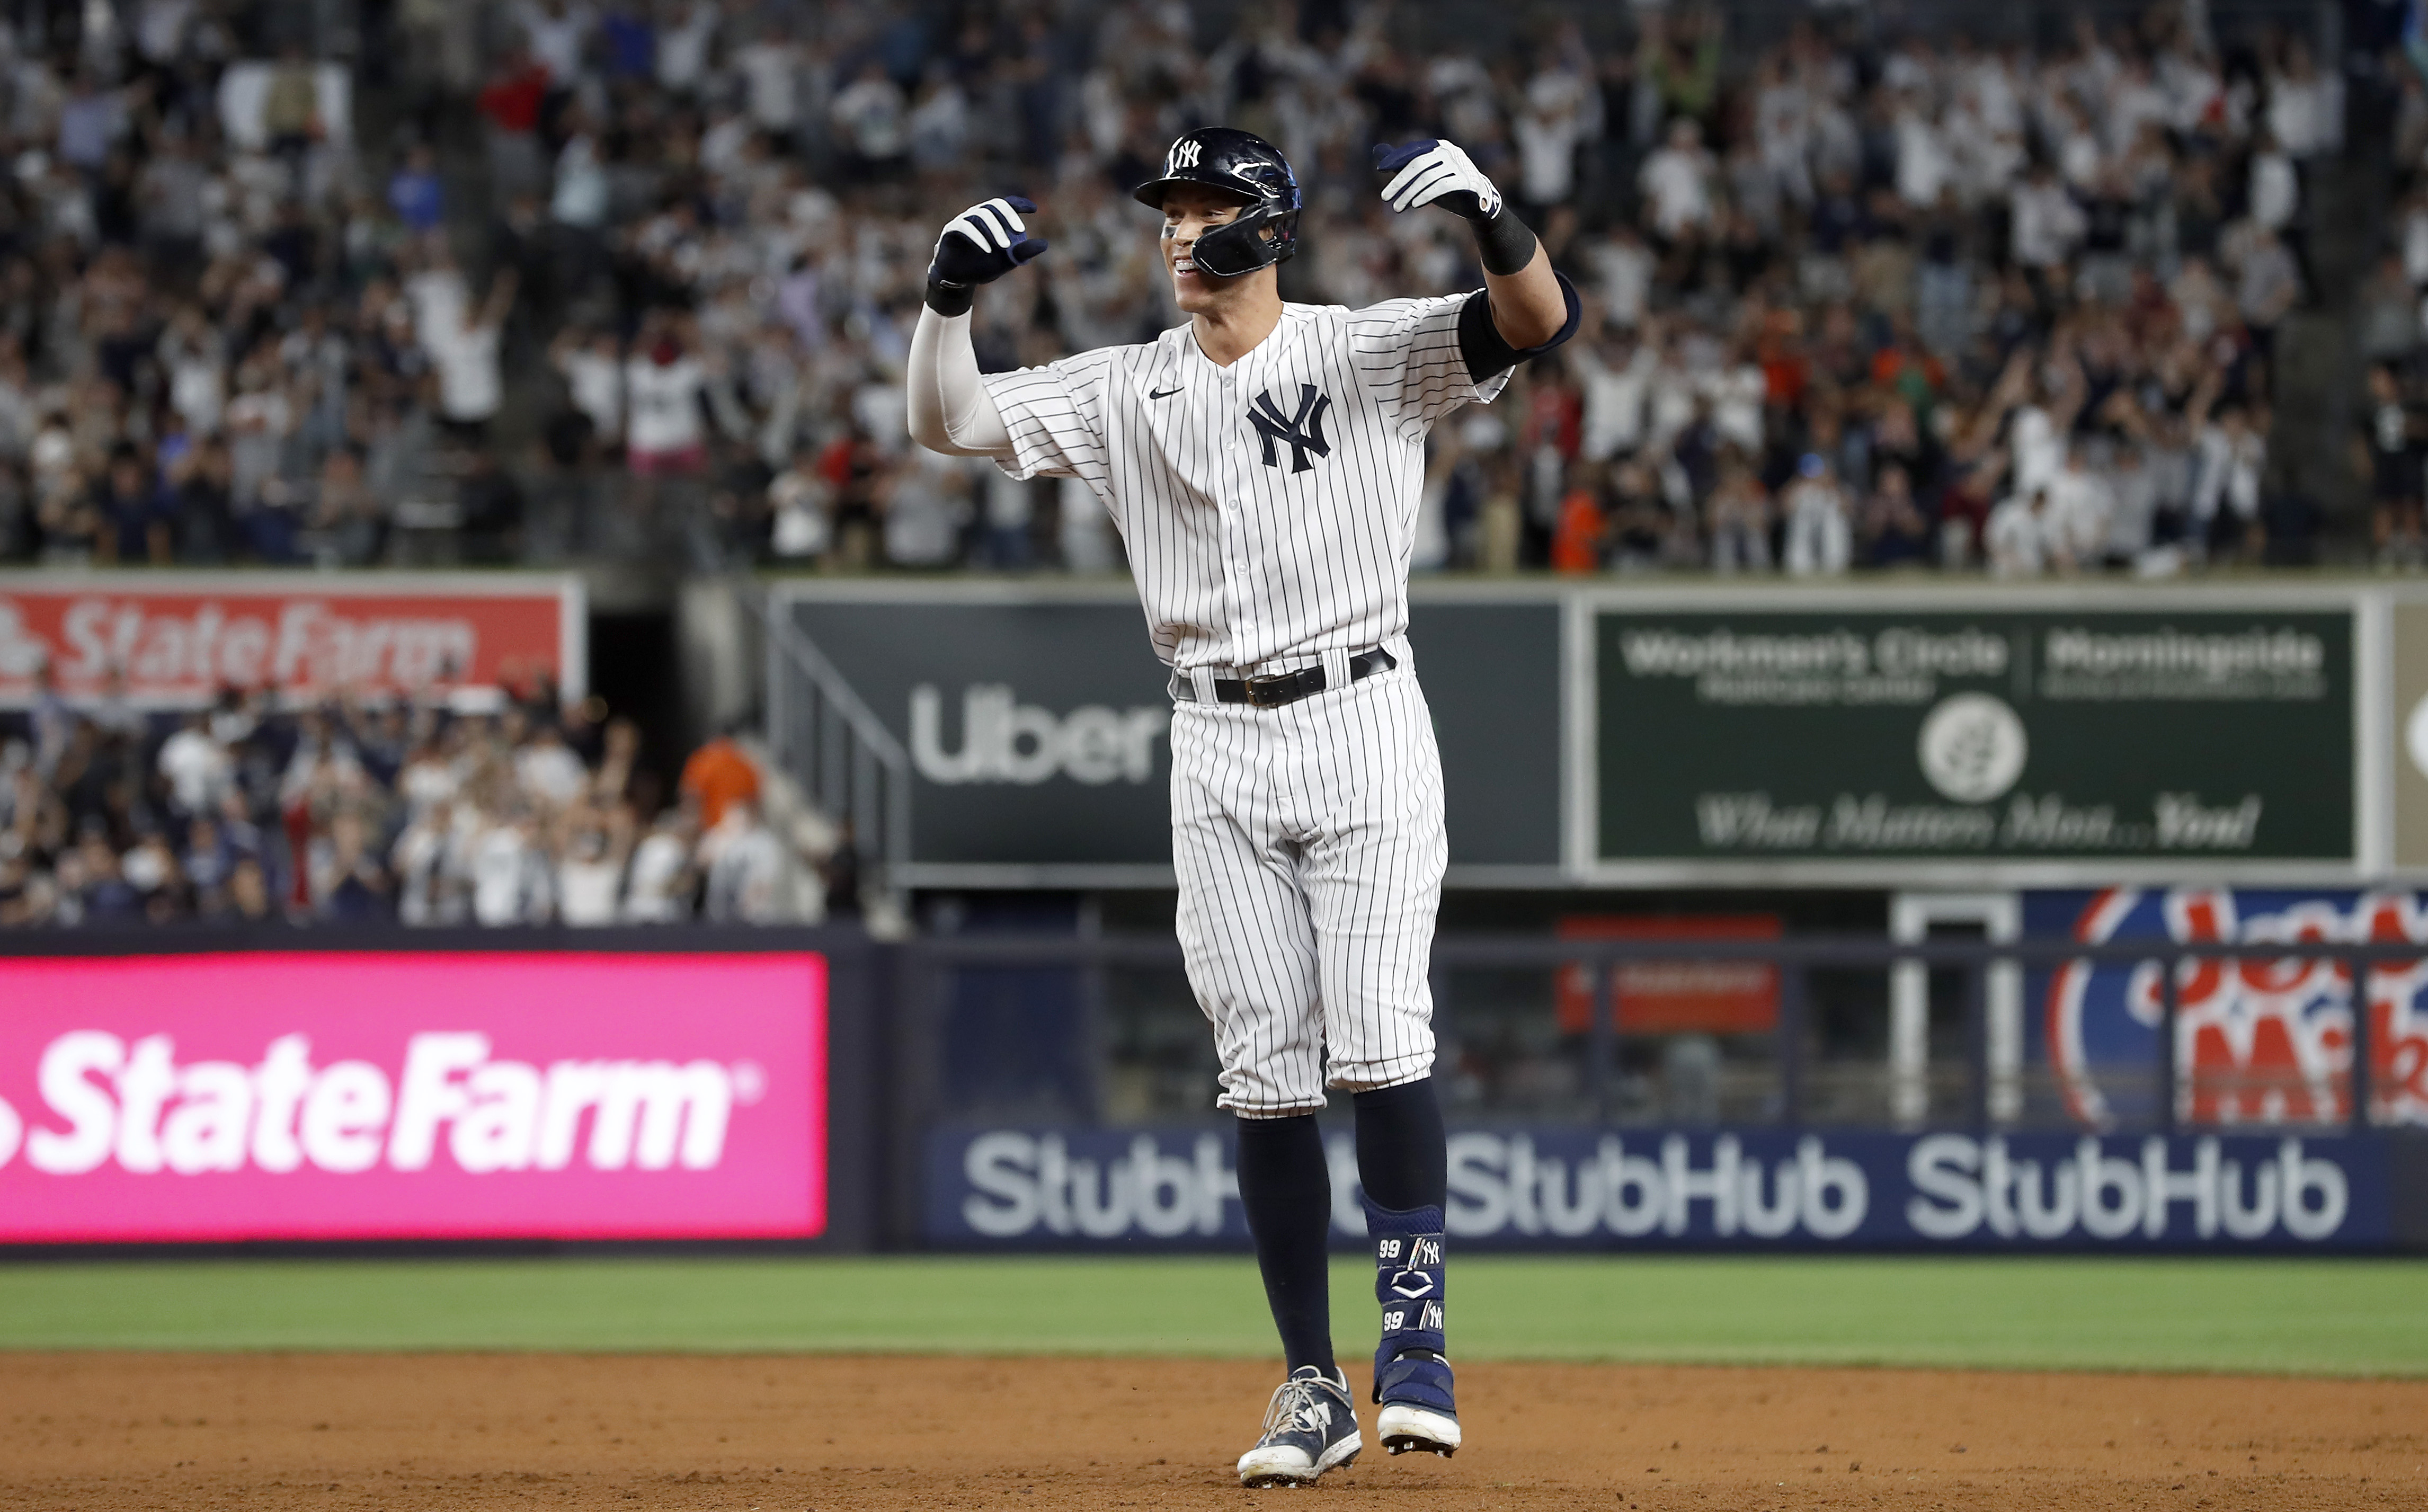 Aaron Judge #99 of the New York Yankees celebrates his ninth inning game winning base hit against the Houston Astros at Yankee Stadium on June 23, 2022 in New York City. The Yankees defeated the Astros 7-6.